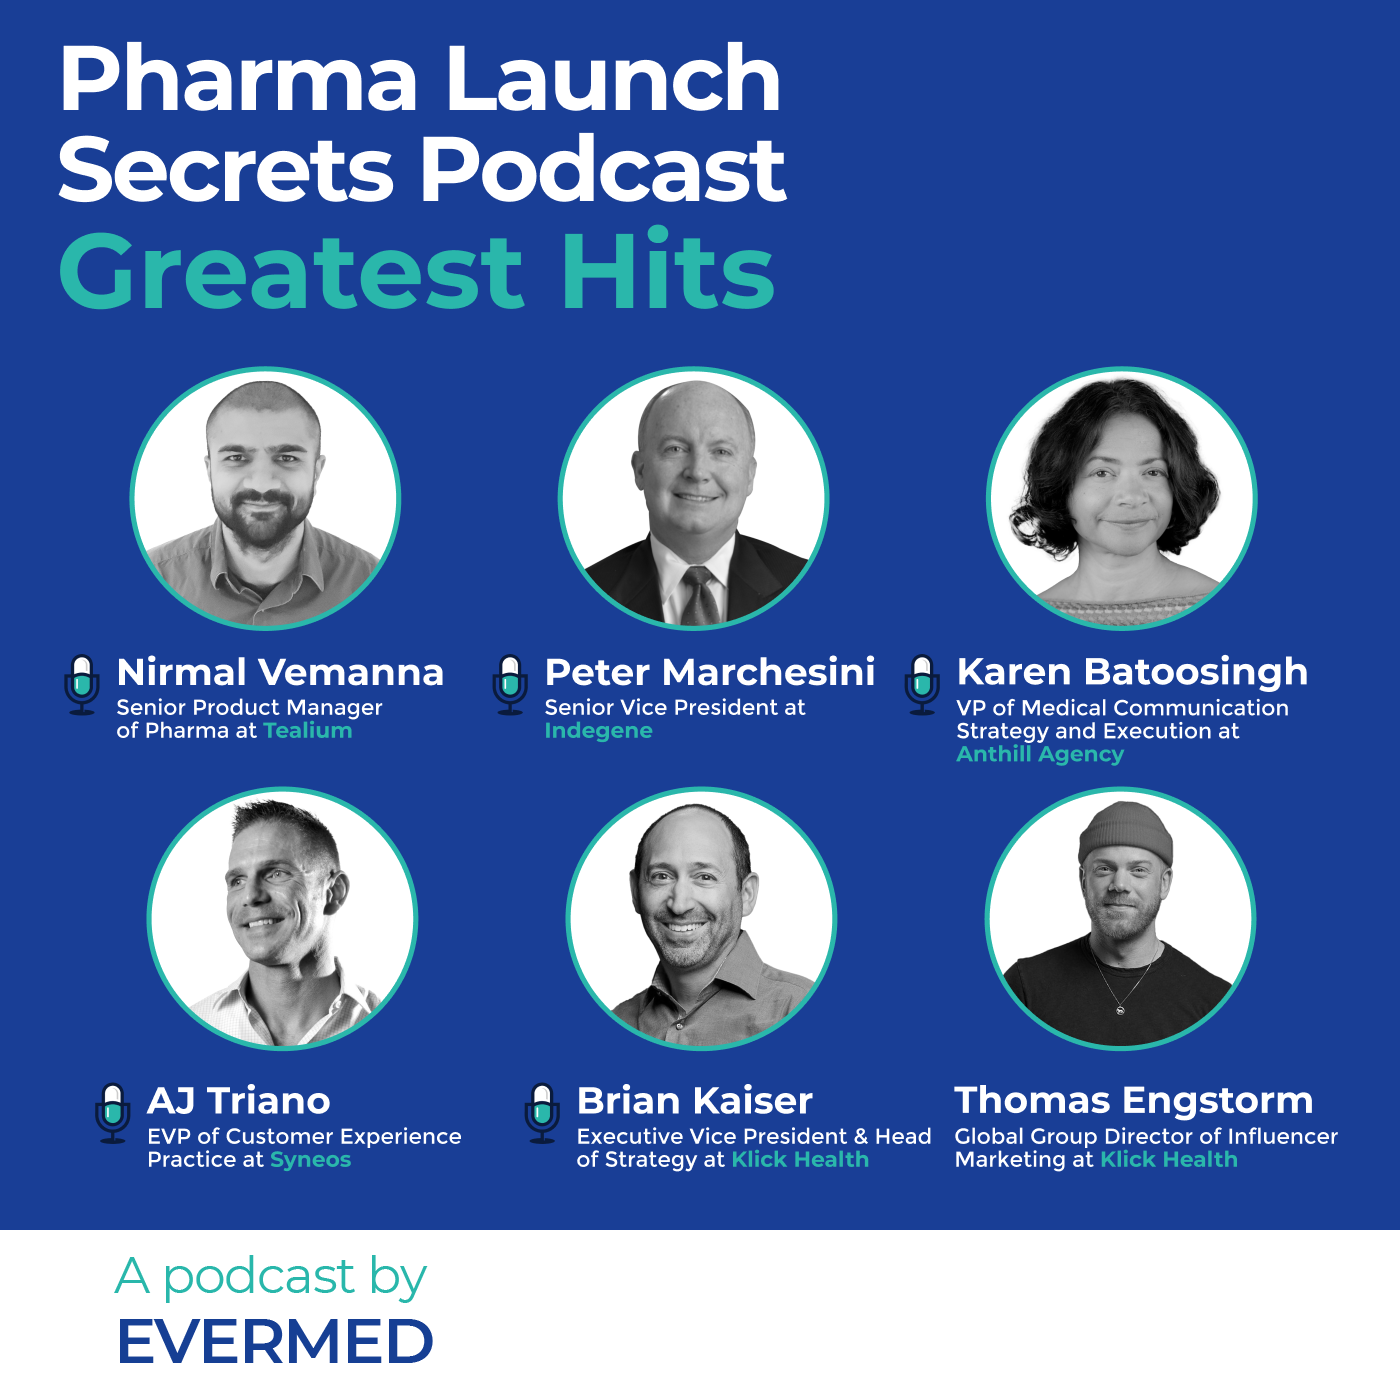 Greatest Hits: A Look Back on Five of the Best Pharma Launch Secrets Episodes